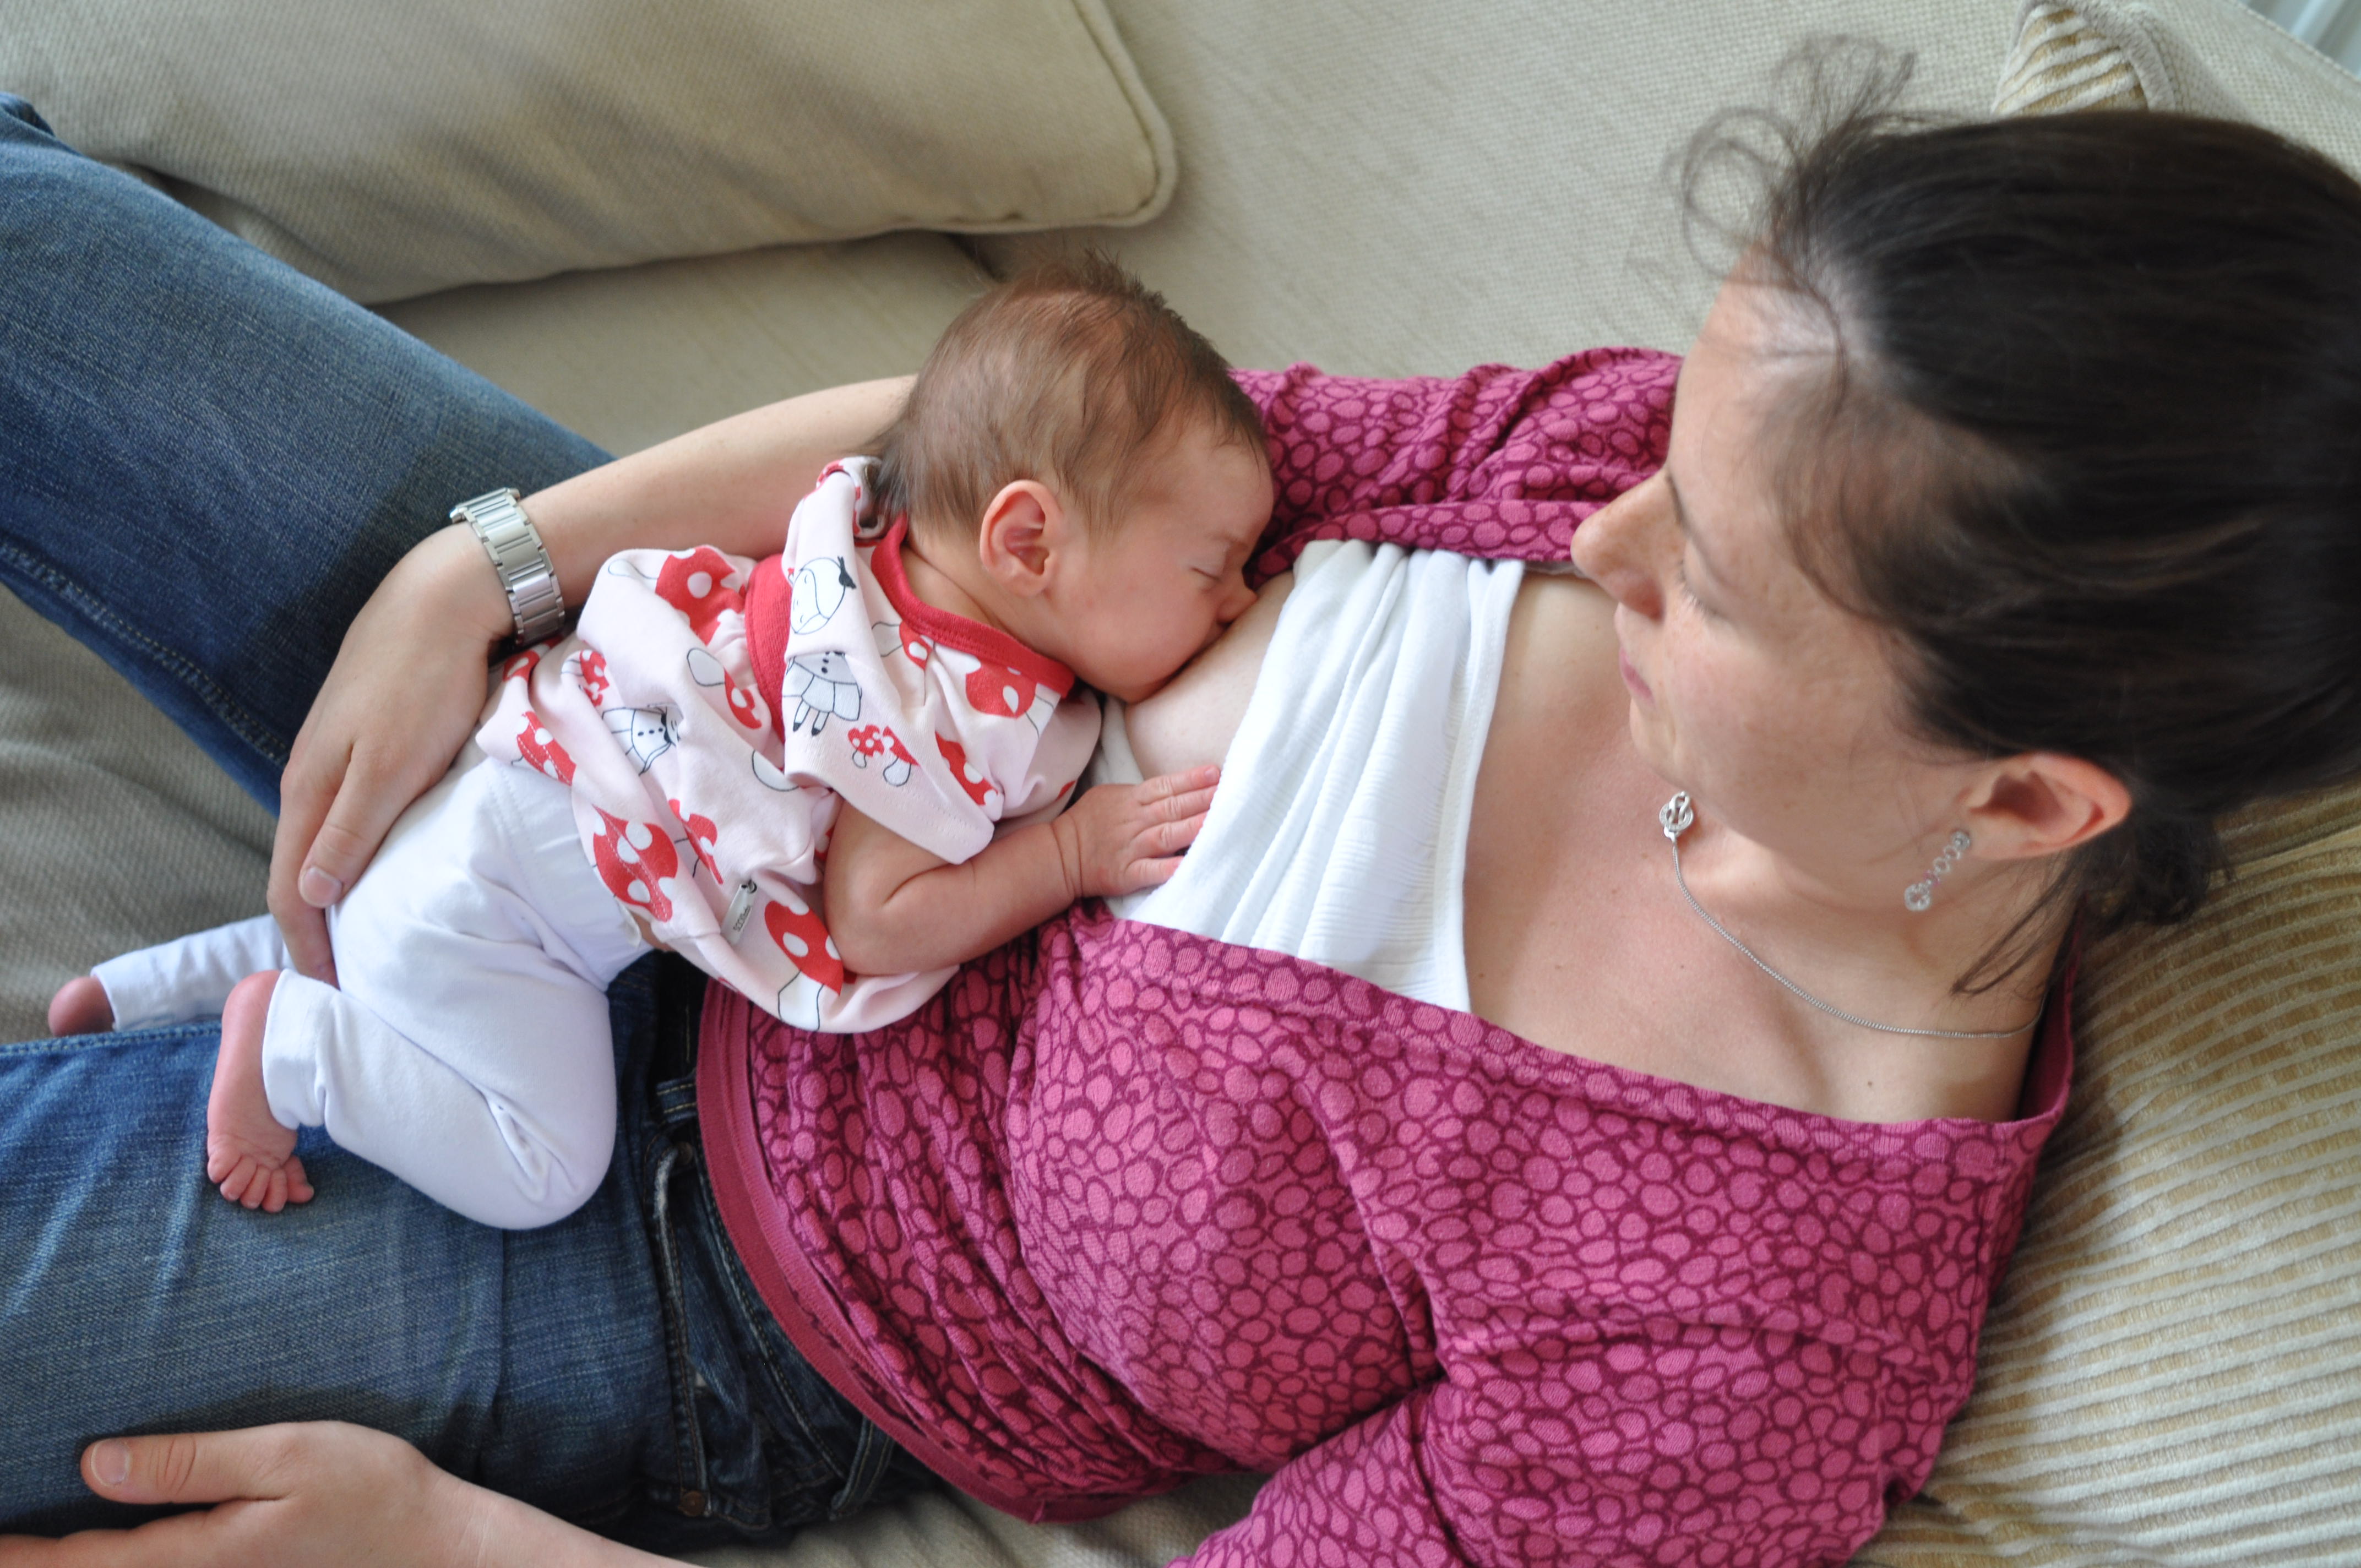 Breastfeeding with Large Breasts: Tips and Tricks to Make it